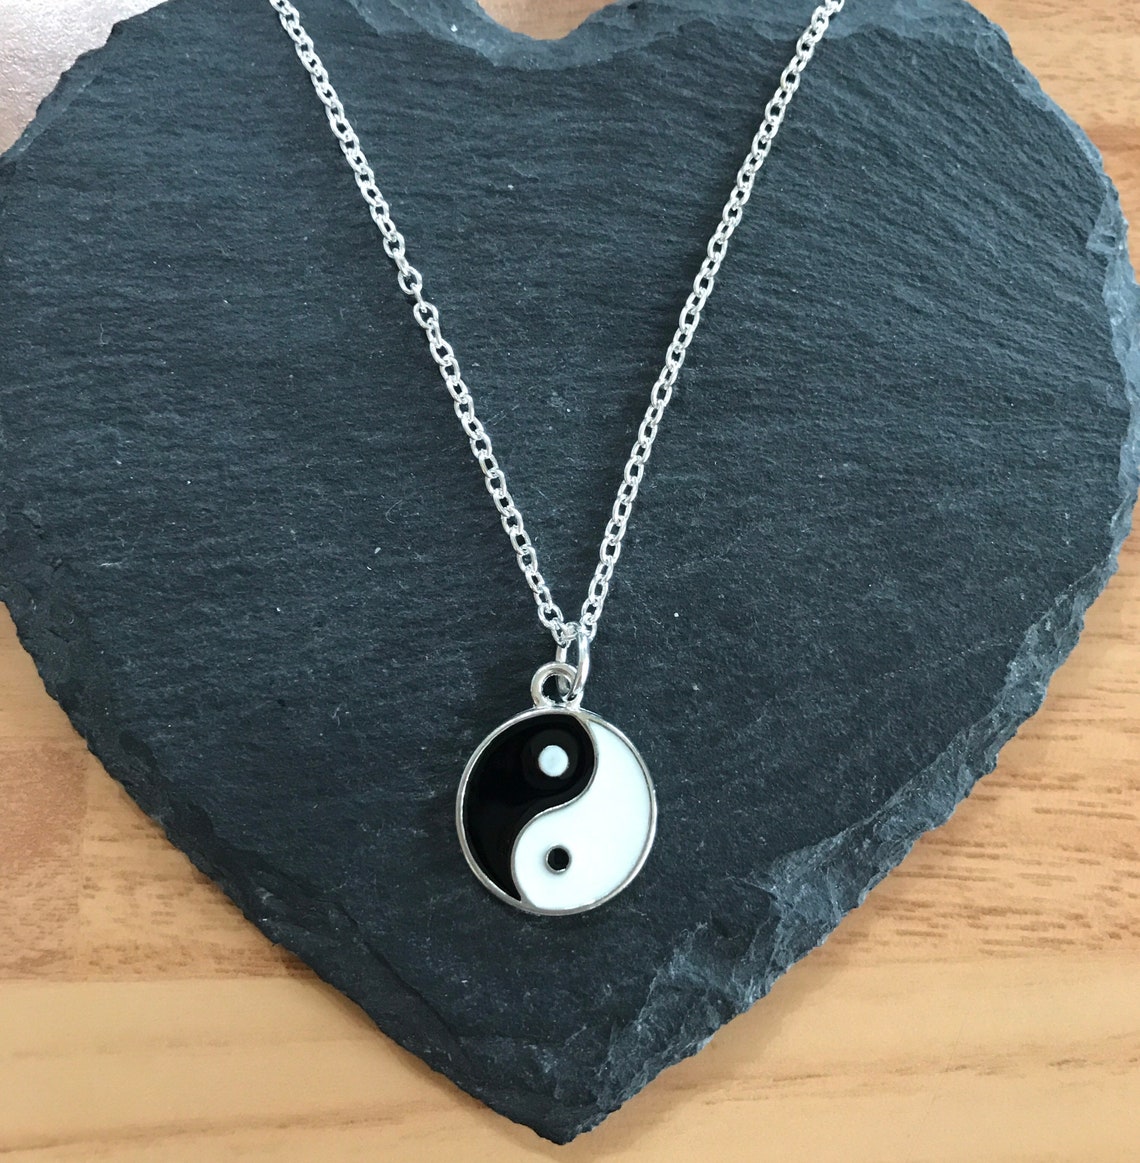 Yin Yang double sided Necklace silver plated chain | Etsy